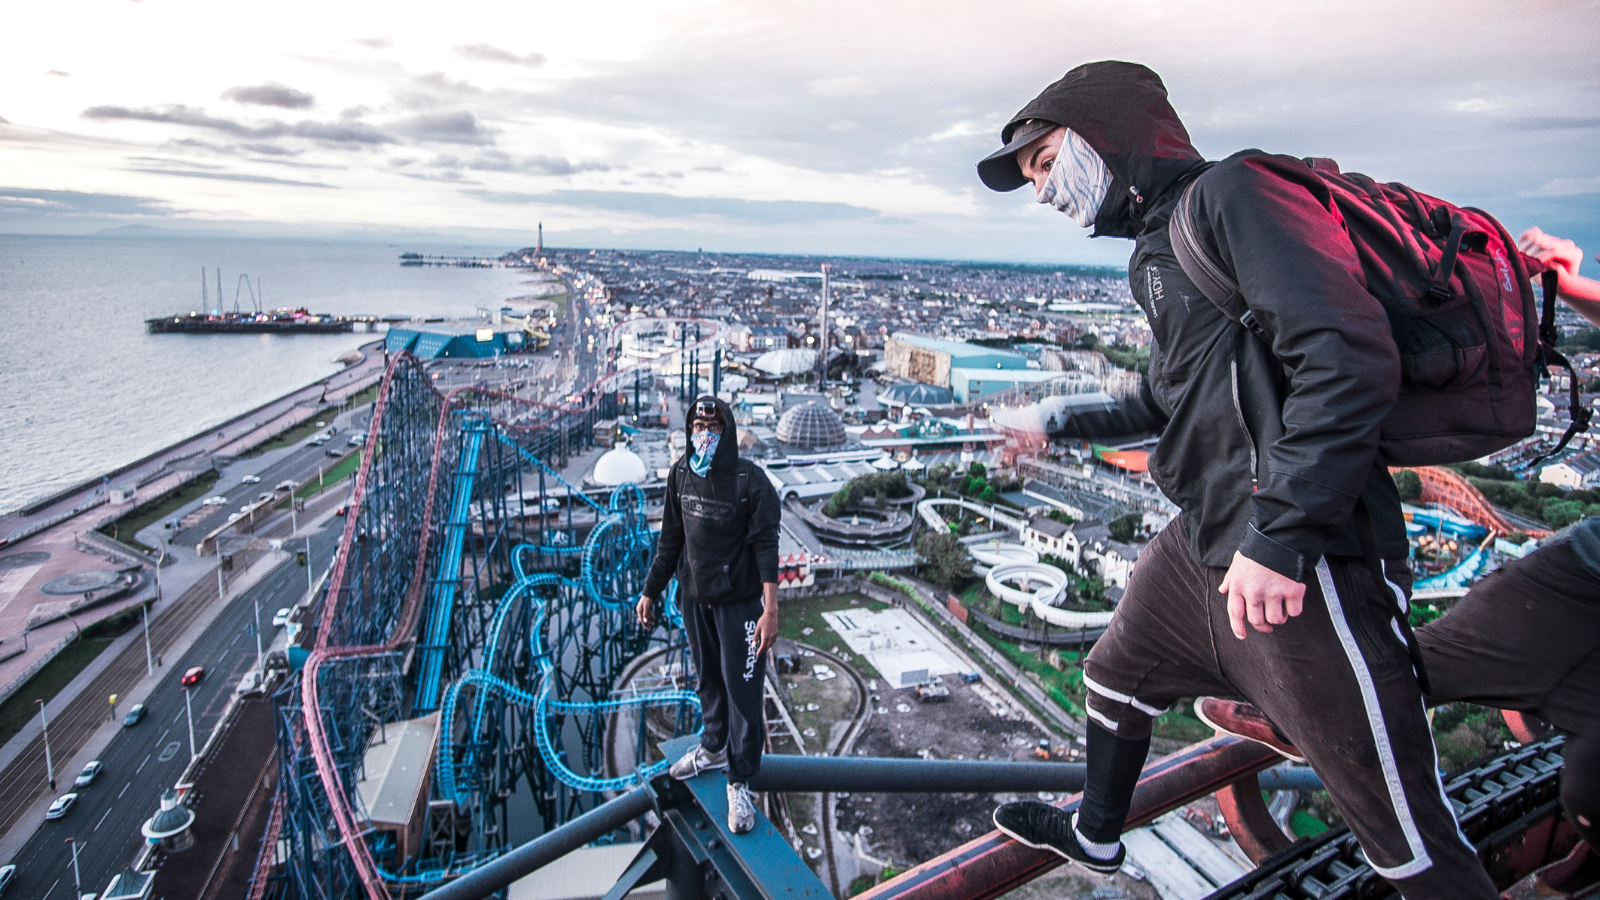 Two people with their faces covered wearing black tracksuits balance on skinny beams high in the sky - they appear to be on top of a tall building. Far below them are the tracks of rollercoasters in a theme park.